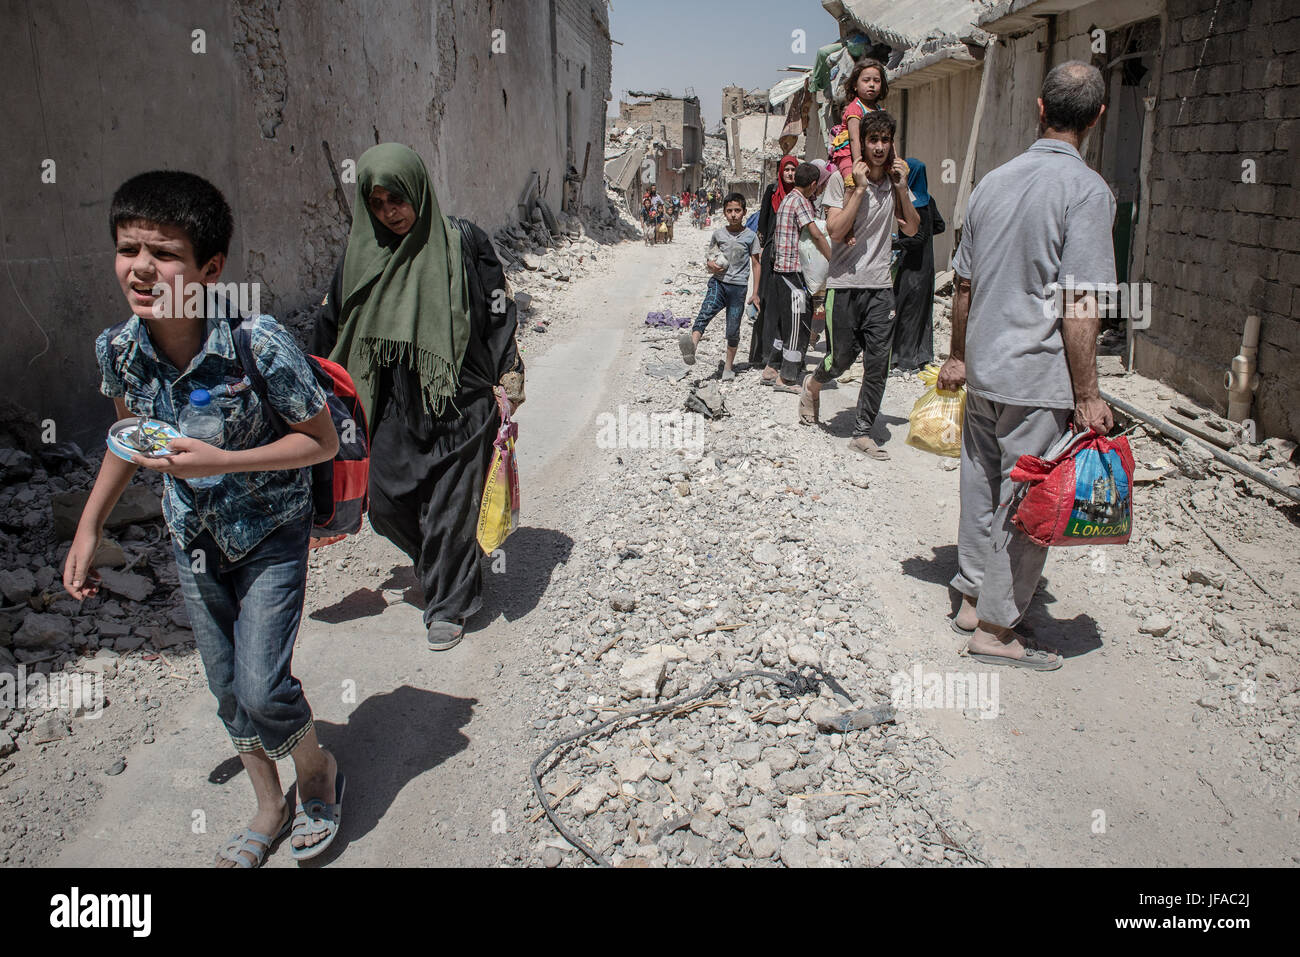 Iraqi civilians flee heavy fighting between Iraqi forces and the Islamic State in the Old City of Mosul, Iraq 29 June 2017.Thousands of civilians are fleeing the Old City towards IDP (Internal Displaced People) camps, According to UNHCR, more than 875,000 people have fled Mosul since the beginning of the fighting in October 2016. Photo: Hugo Passarello Luna/Dpa/dpa Stock Photo